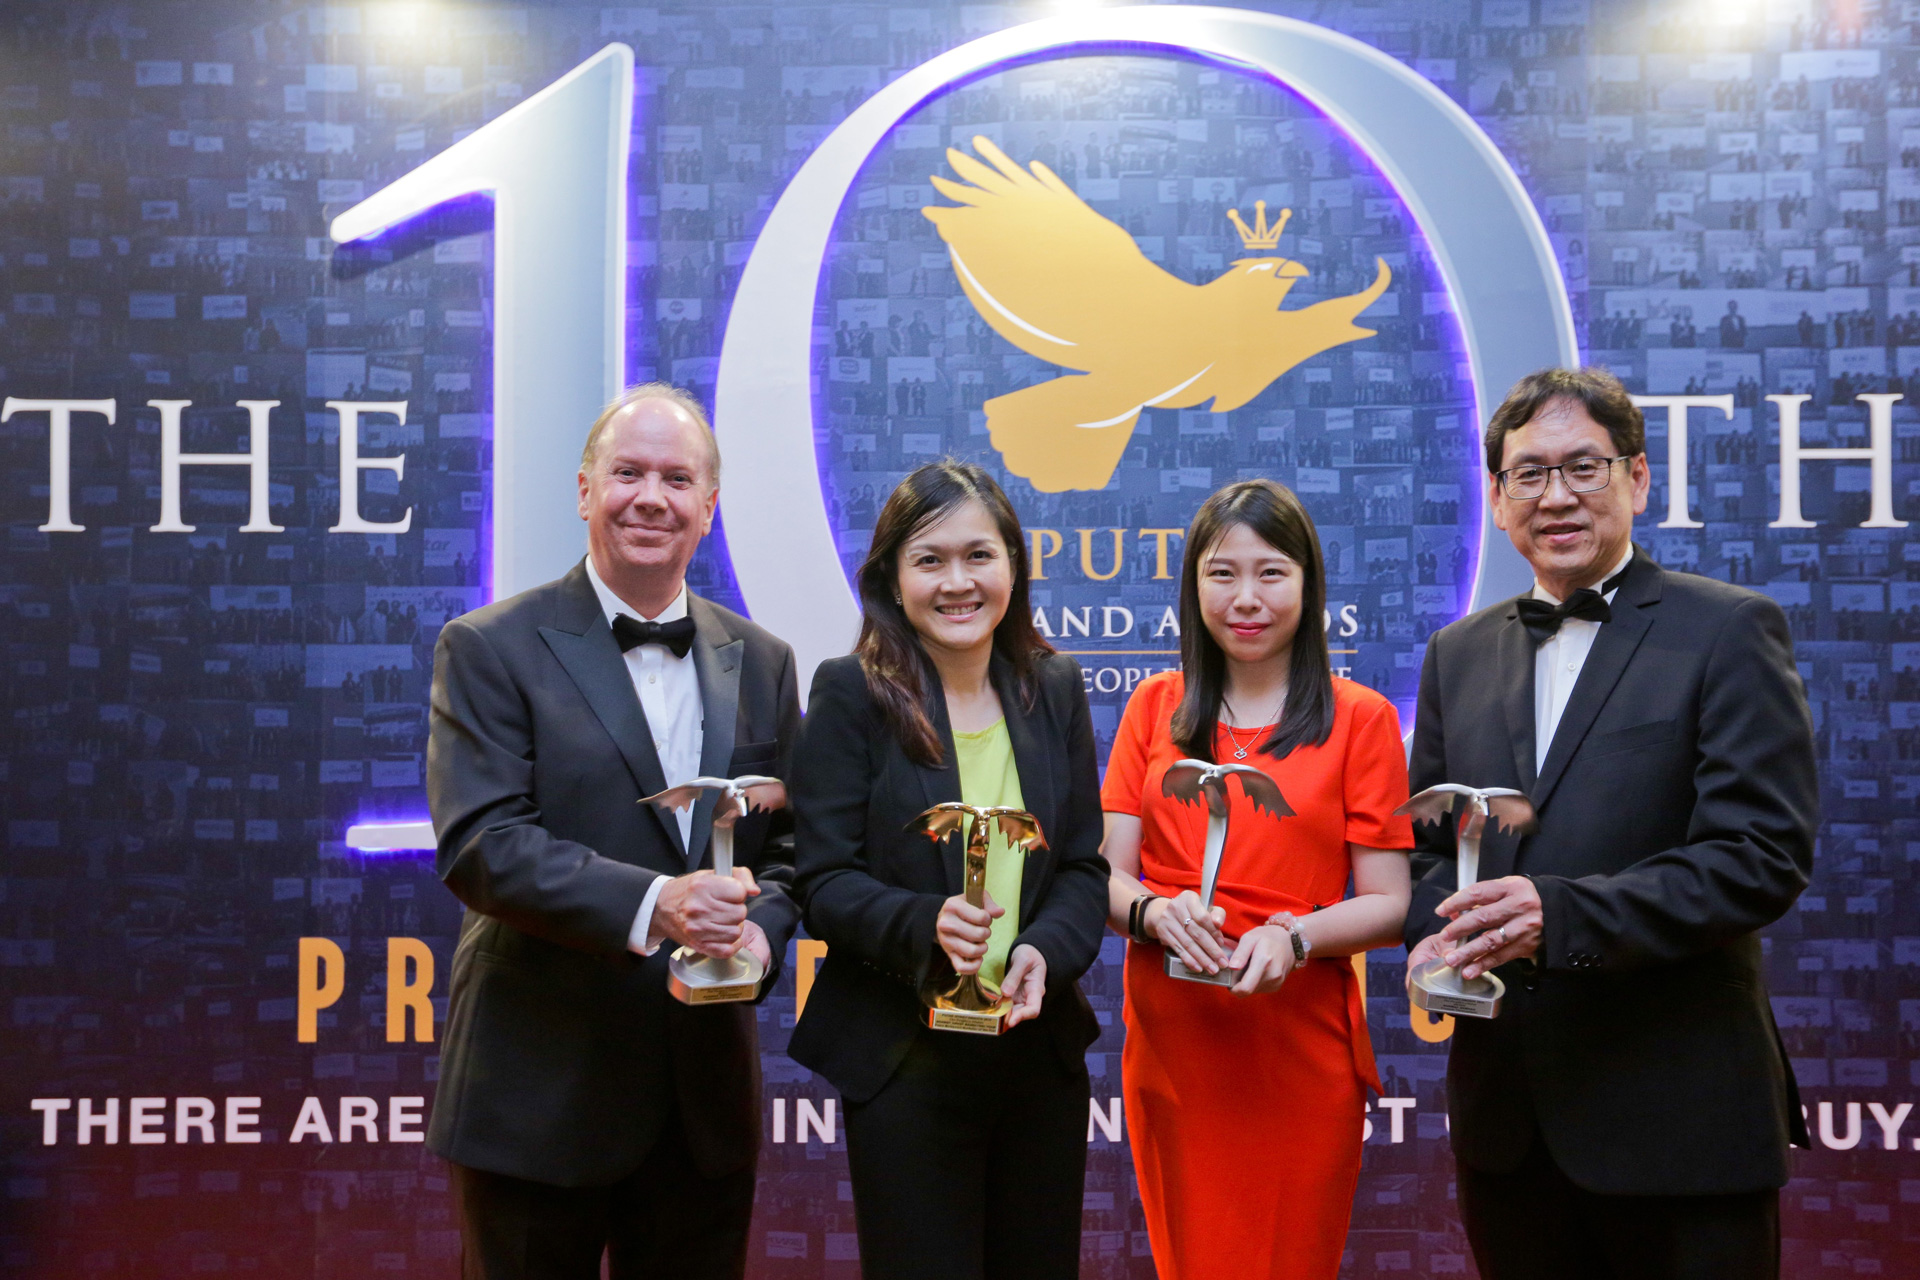 Sunway Group Emerges as the Biggest Winner with Four Accolades at Putra Brand Awards 2019